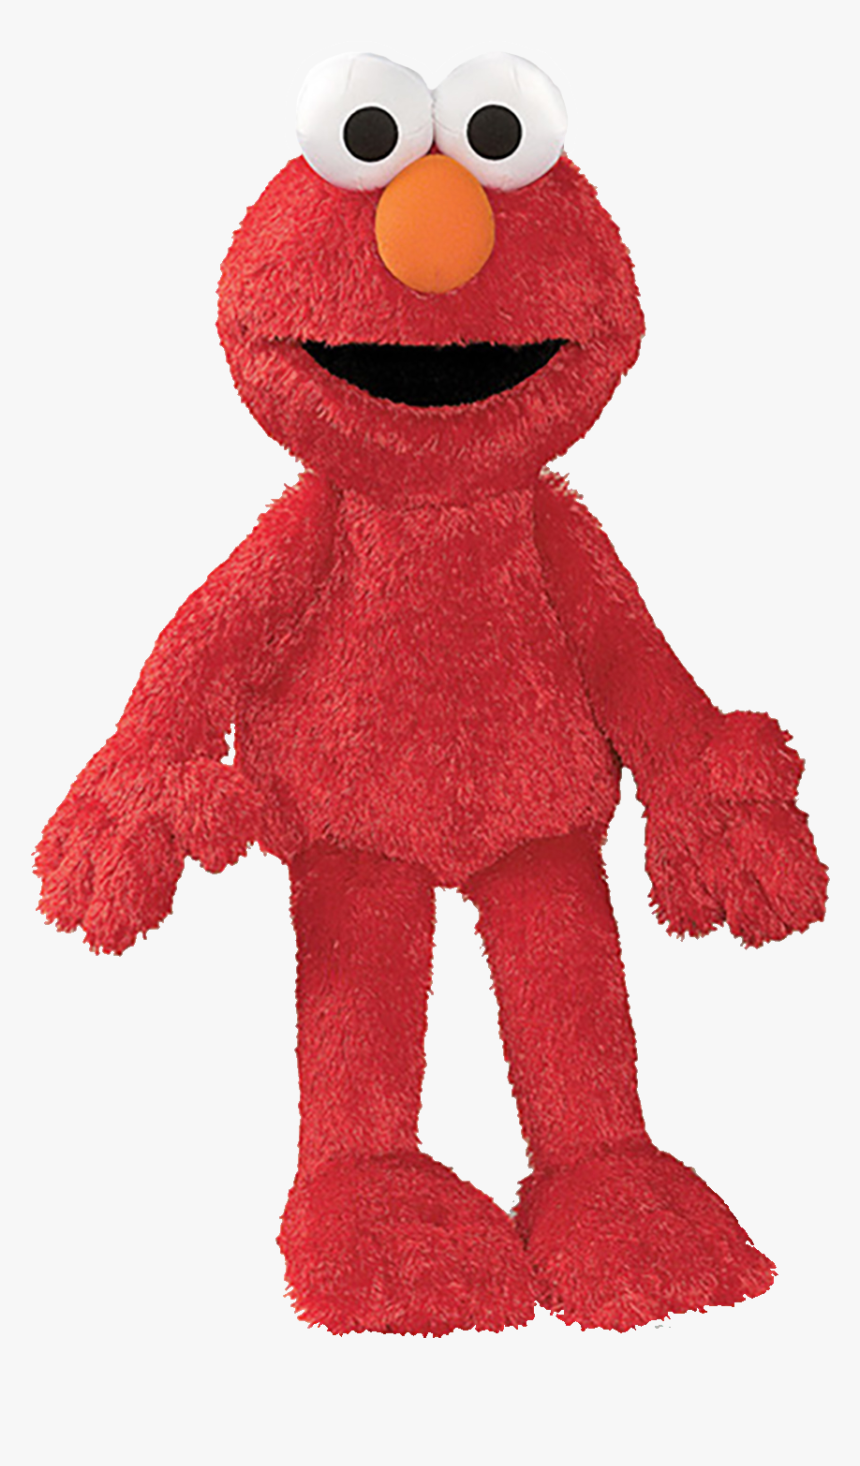 Anthonythepepsifan Roblox Wikia Sesame Street Elmo Plush Toy Hd Png Download Kindpng - roblox wikia roblox face free